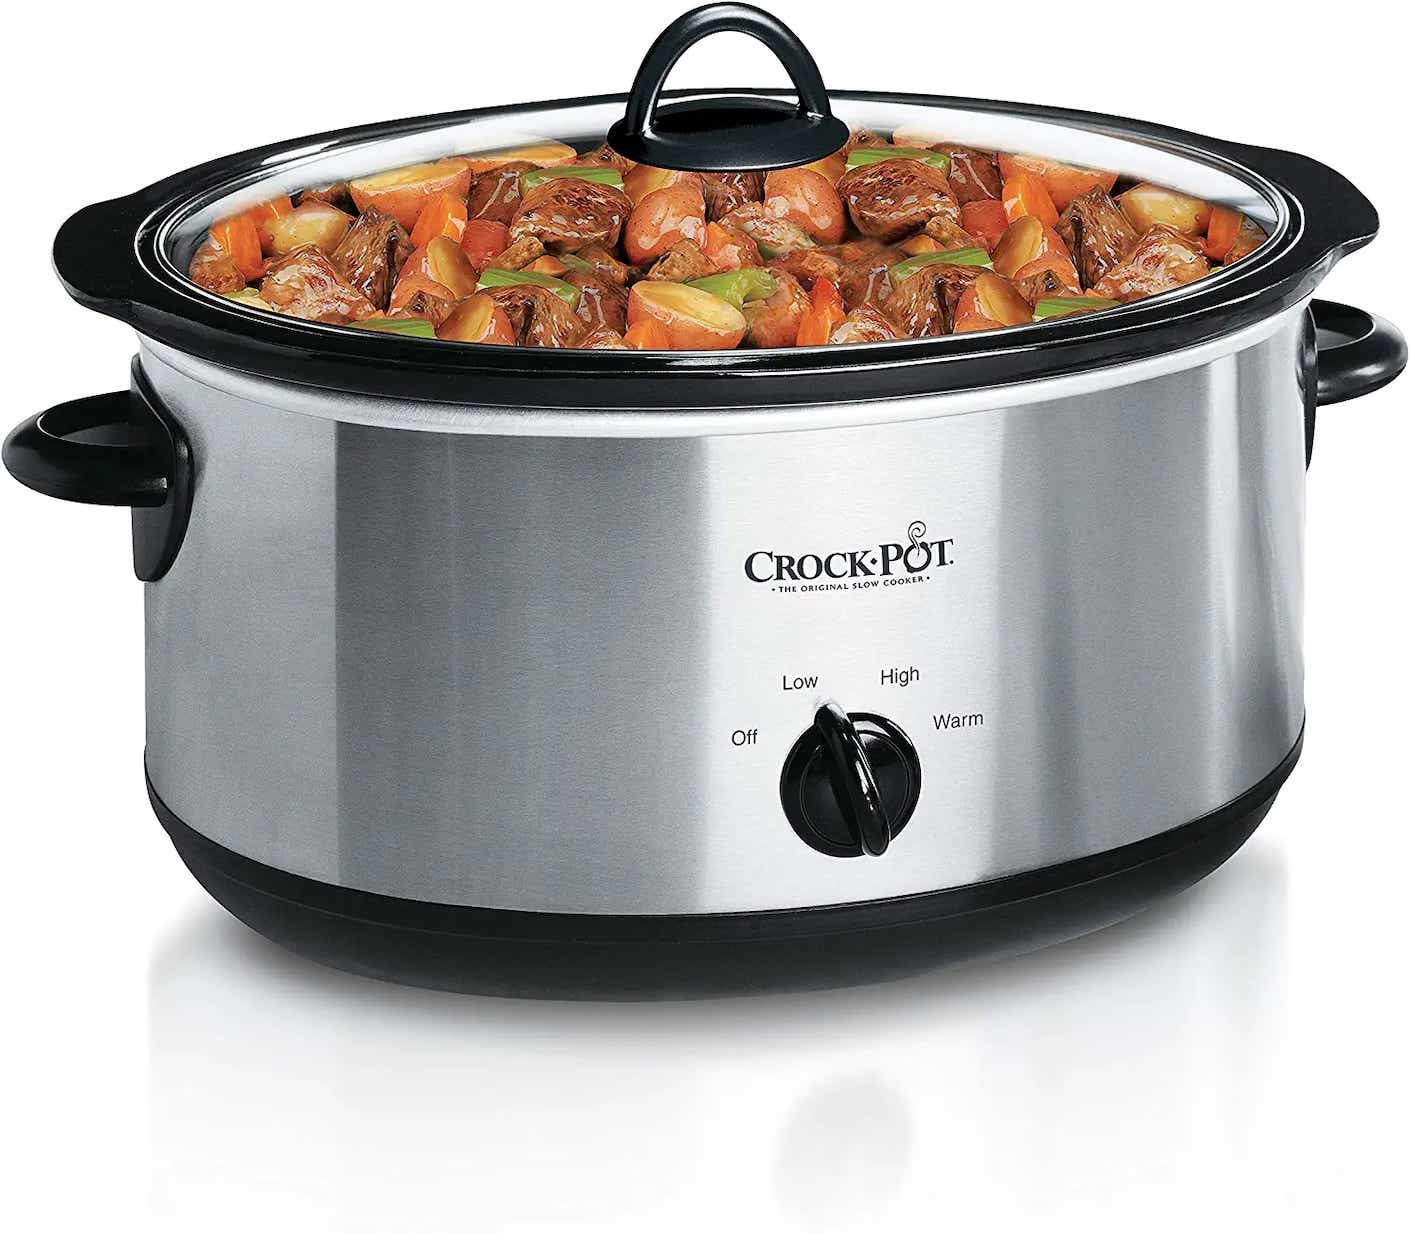 A silver crock pot with black accents holds simmering beef and vegetable stew.